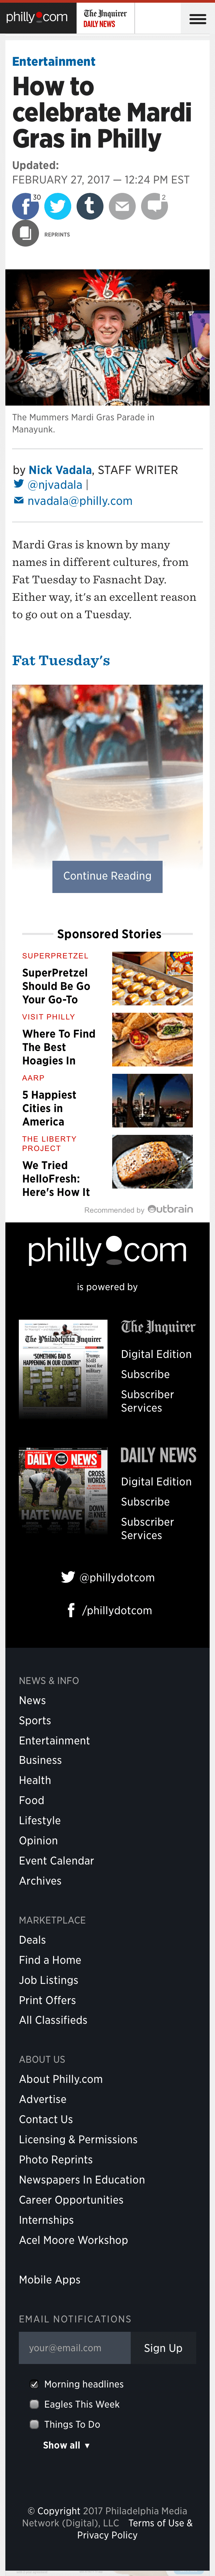 mobile view of an article